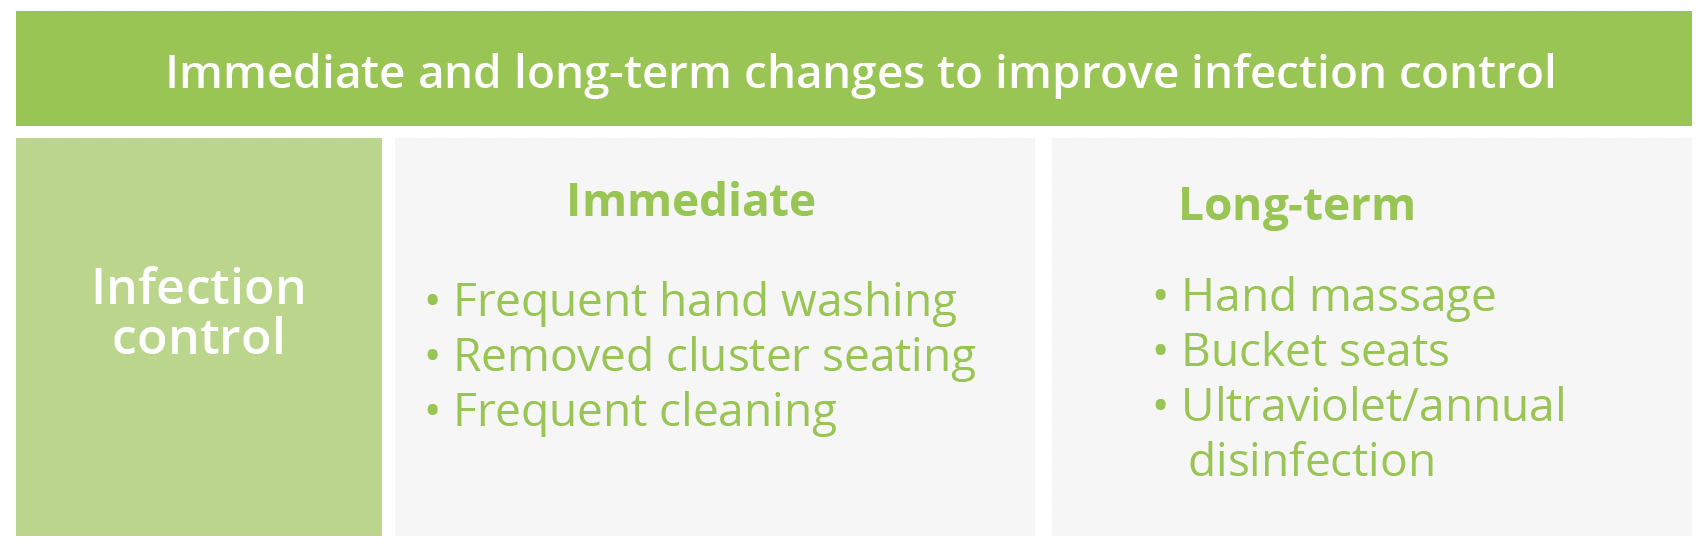 Immediate and long-term changes to improve infection control